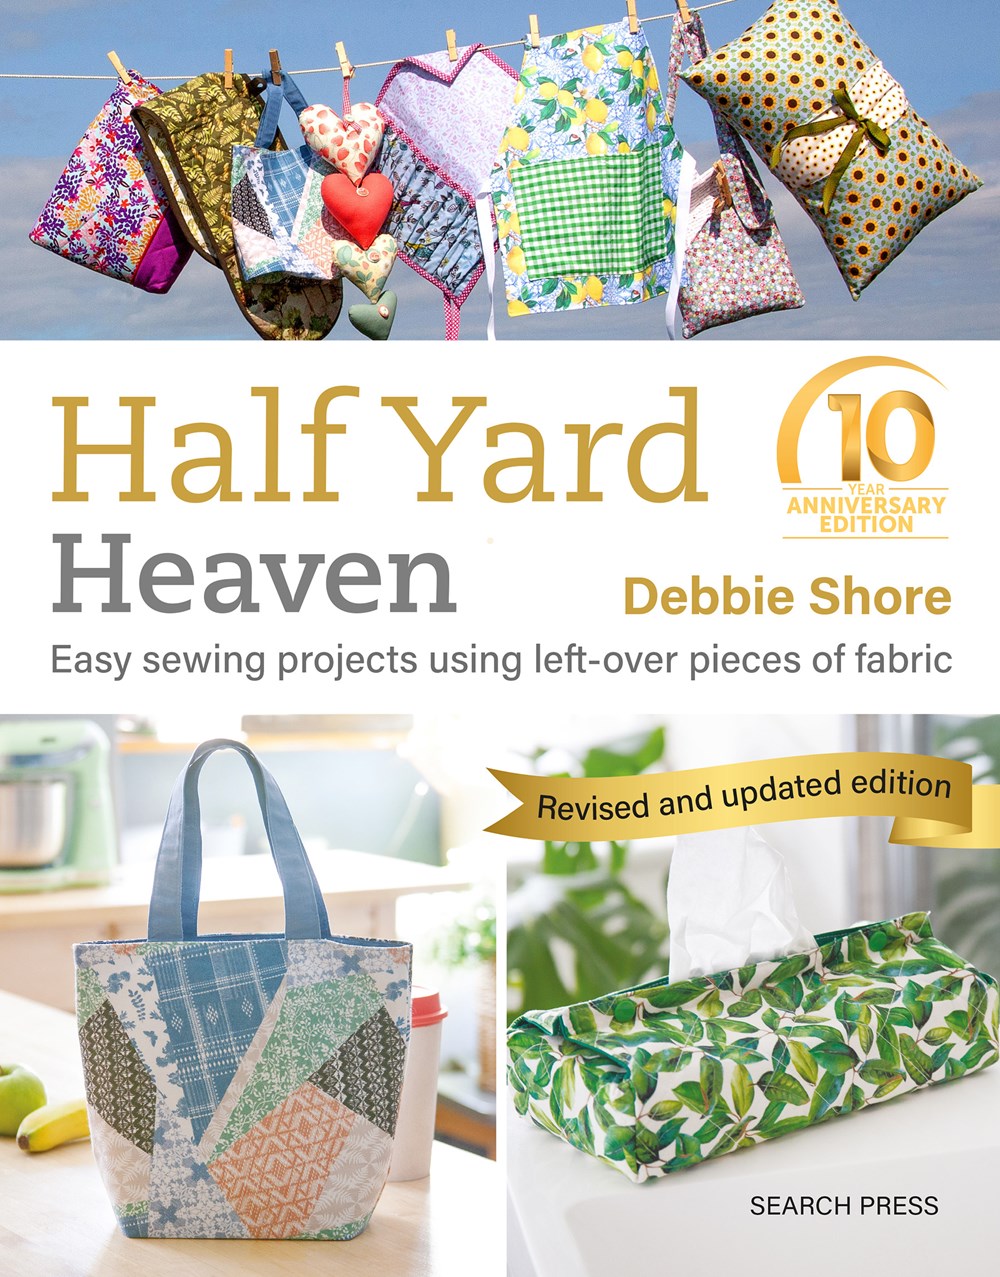 Half Yard Heaven 10-Year Anniversary Edition: Easy Sewing Projects Using Leftover Pieces of Fabric